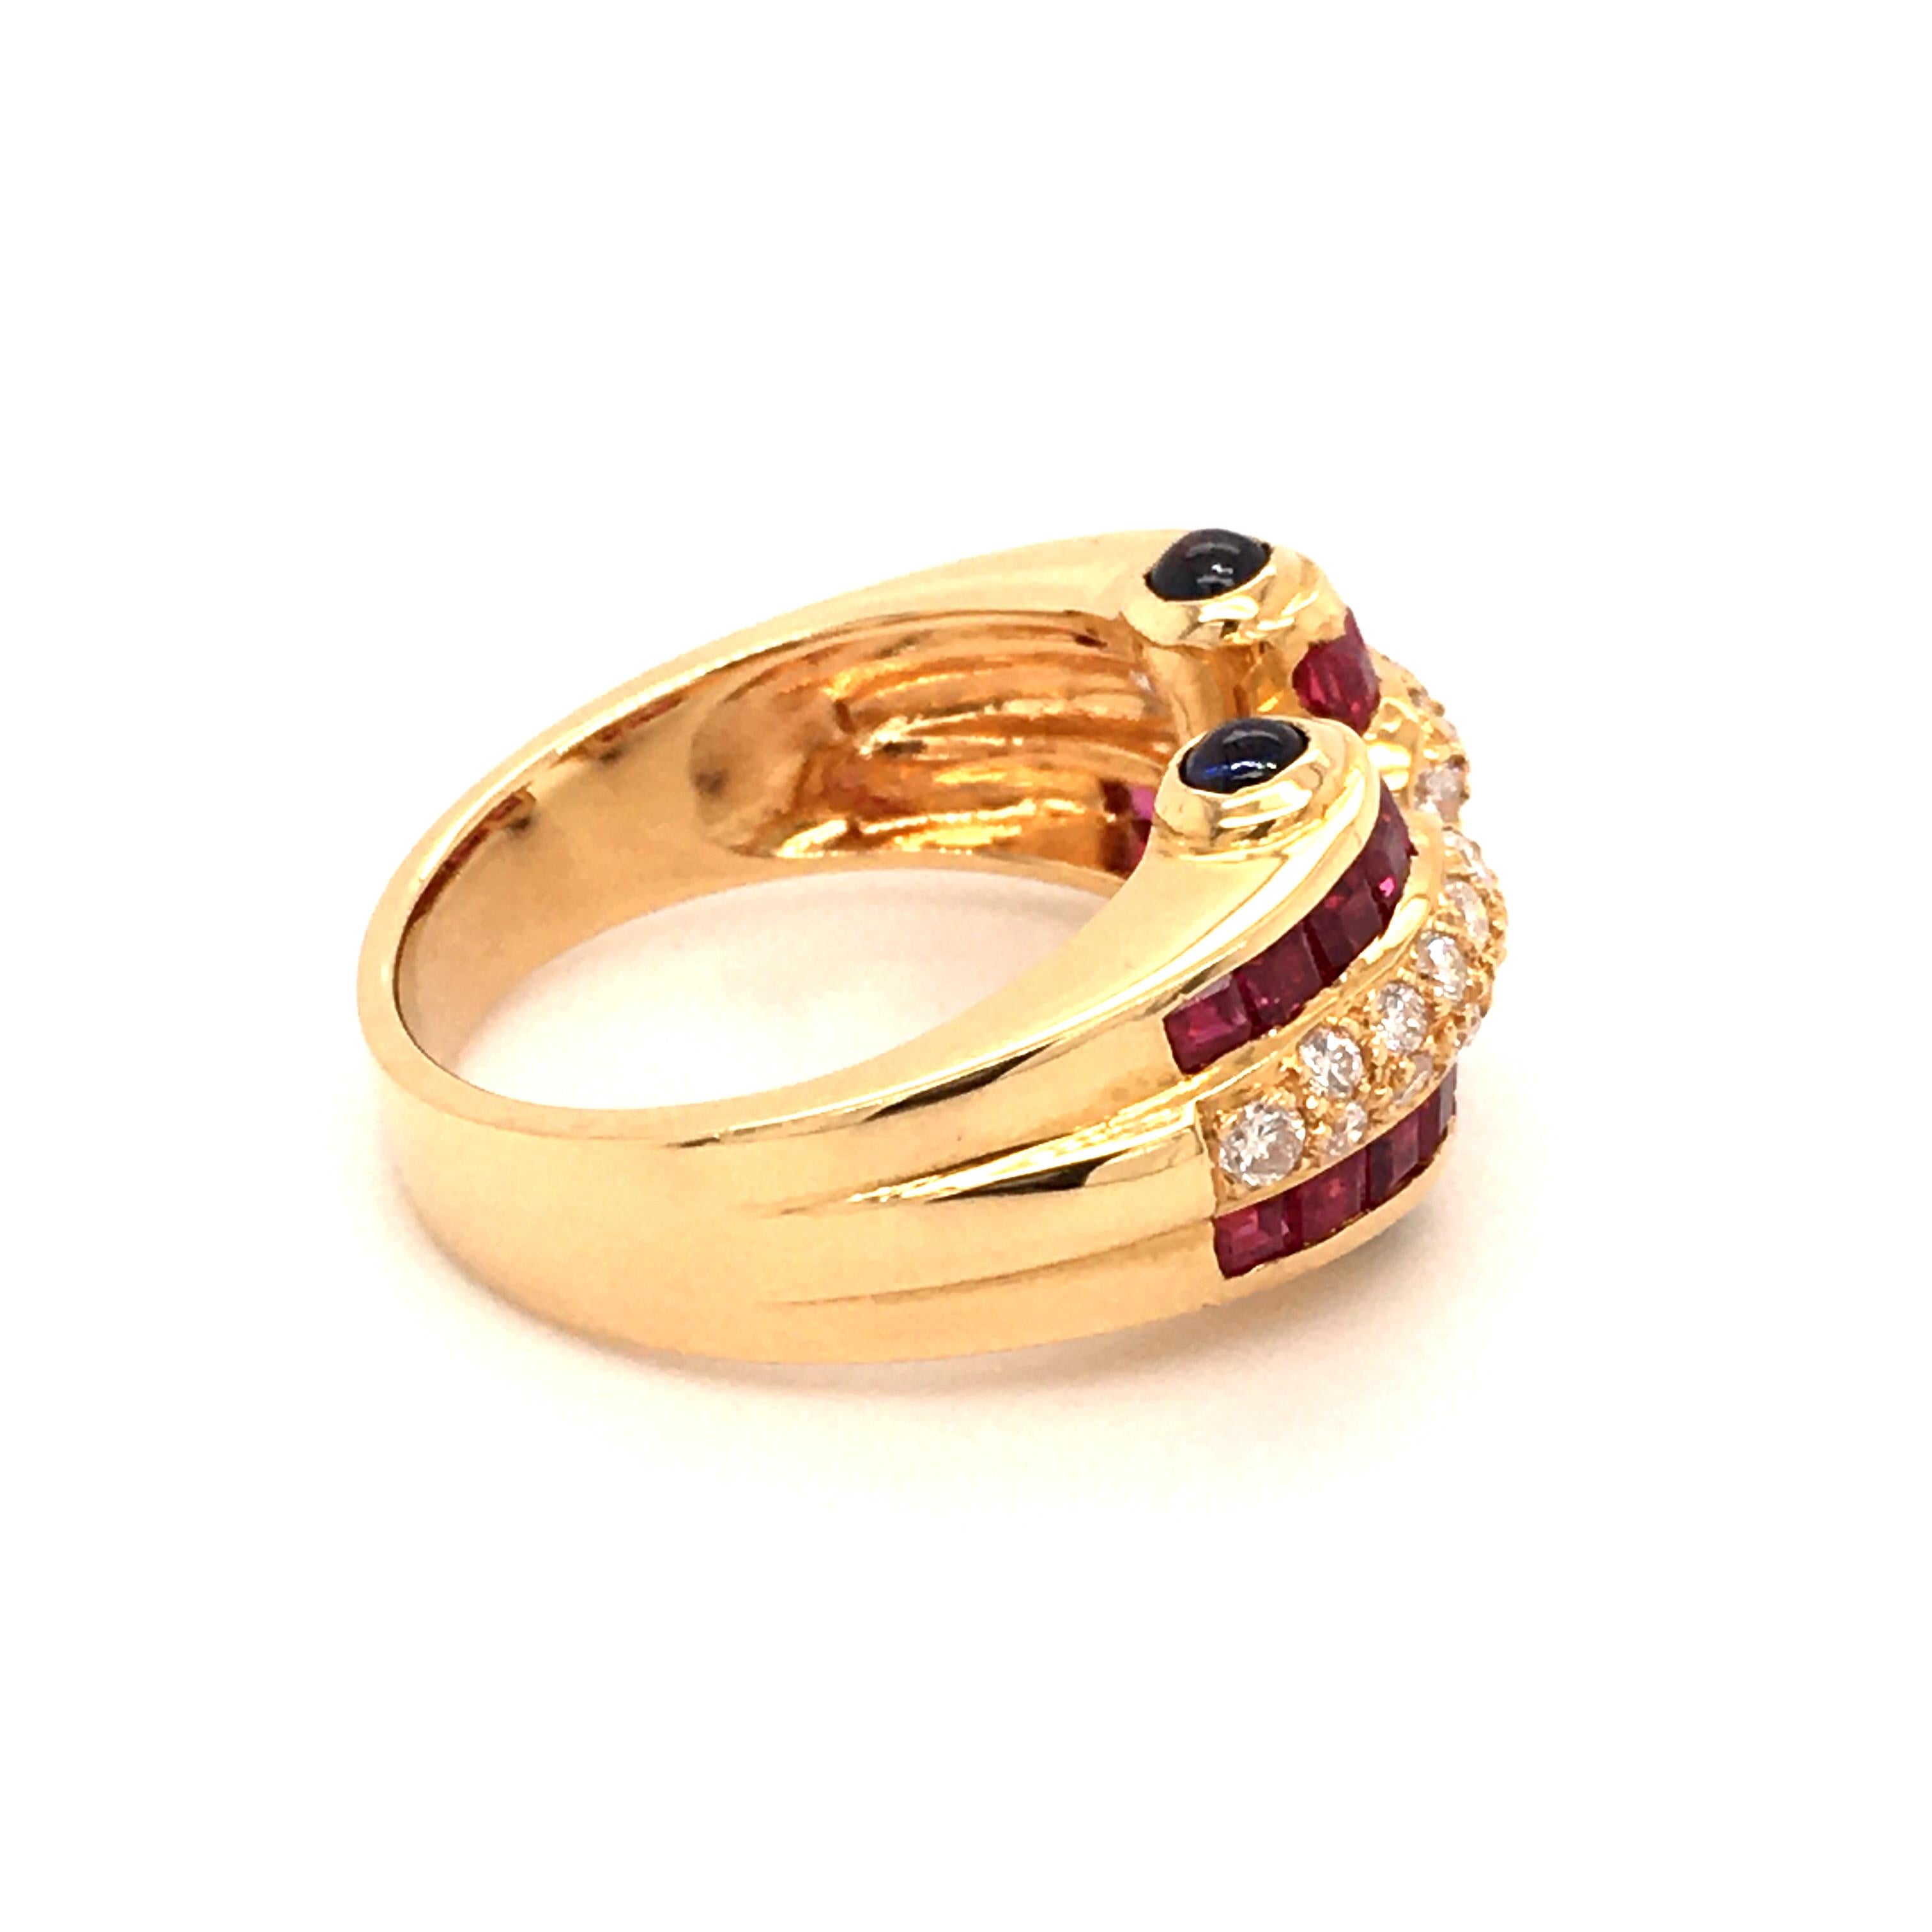 Square Cut Ruby, Diamond and Sapphire Ring in 18 Karat Yellow Gold